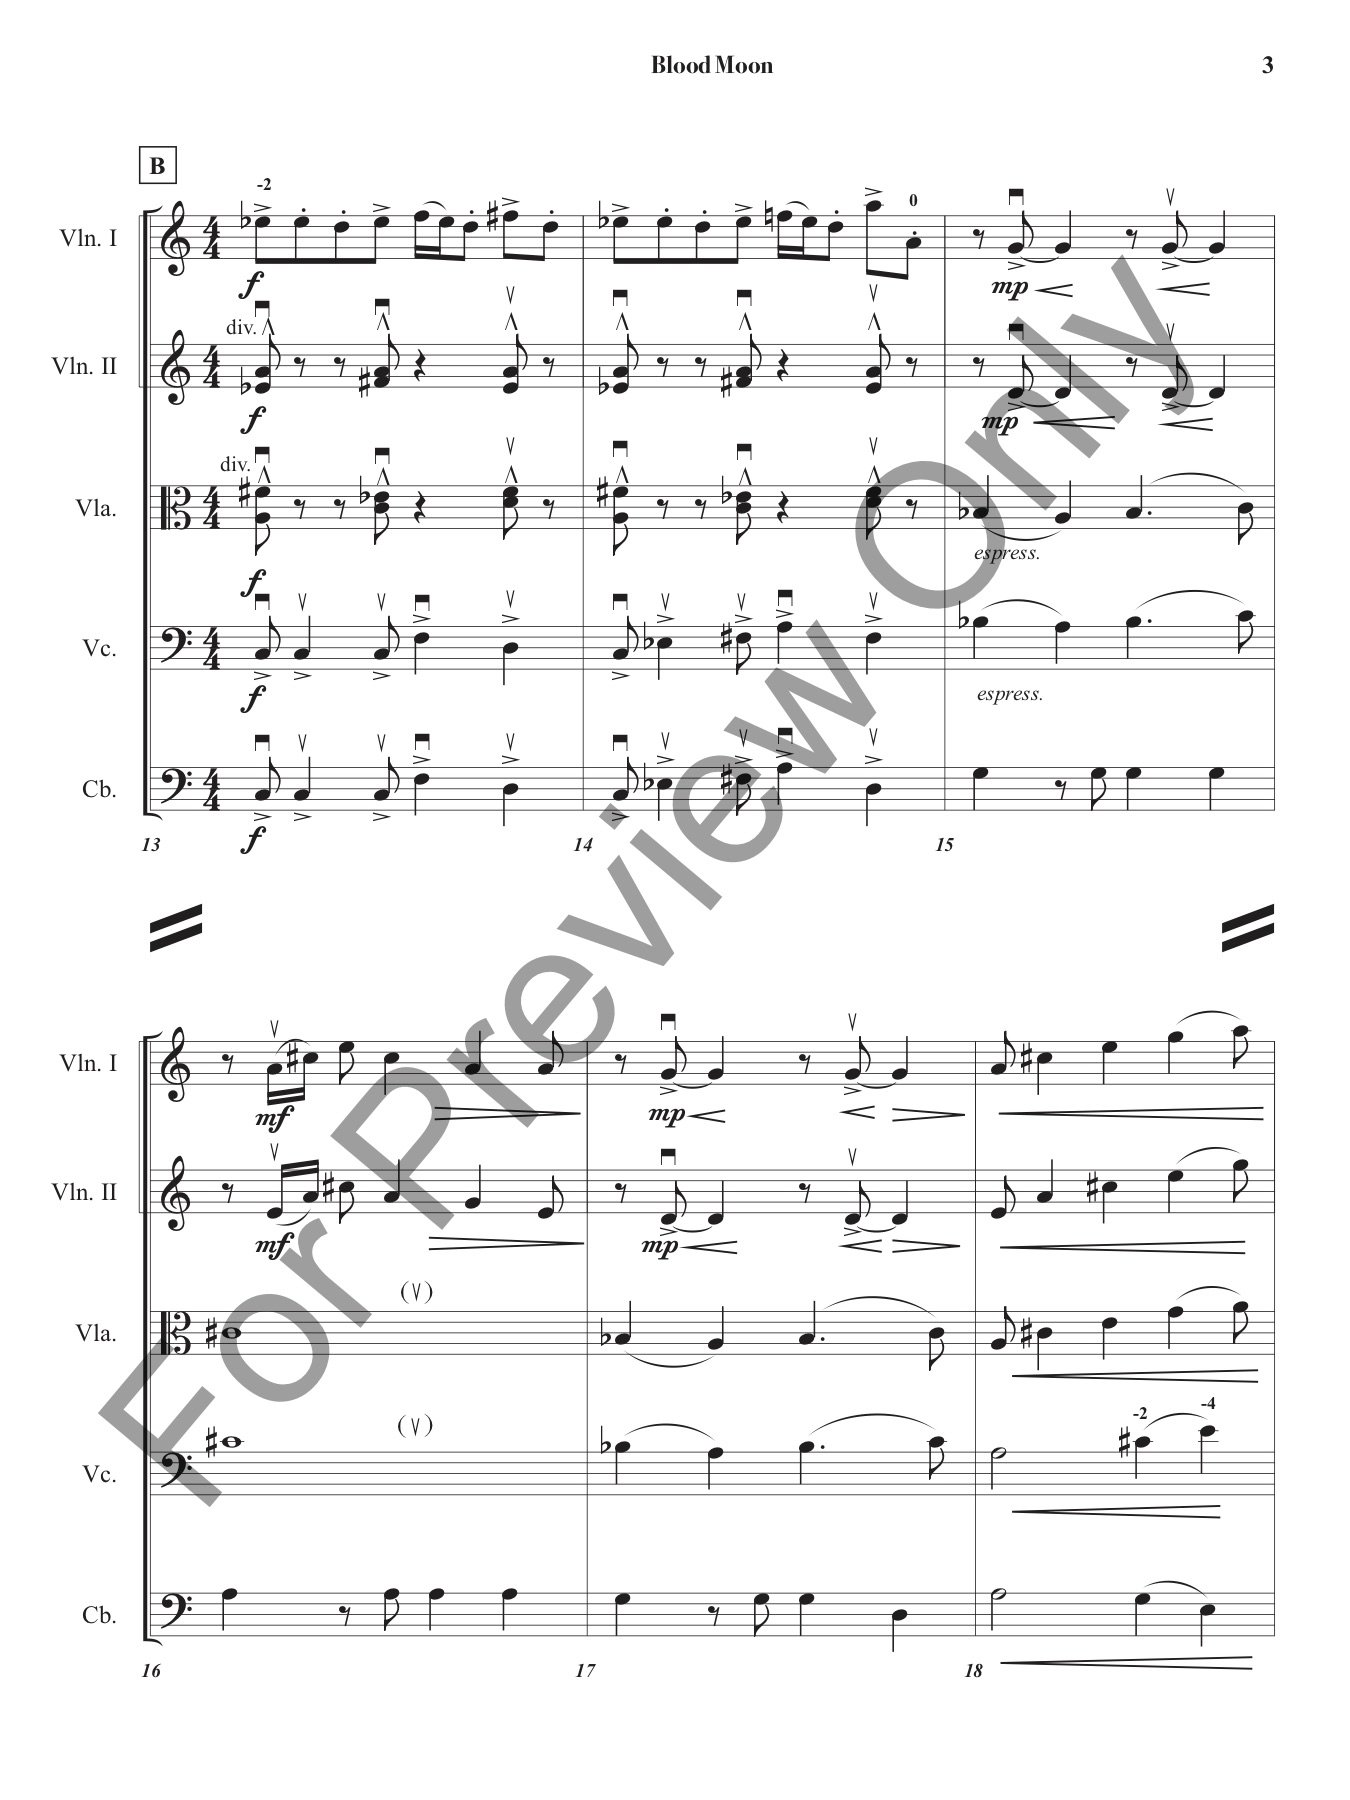 Blood Moon for String Orchestra - Cover Page and Full Score Only (for Preview Only p5).jpg